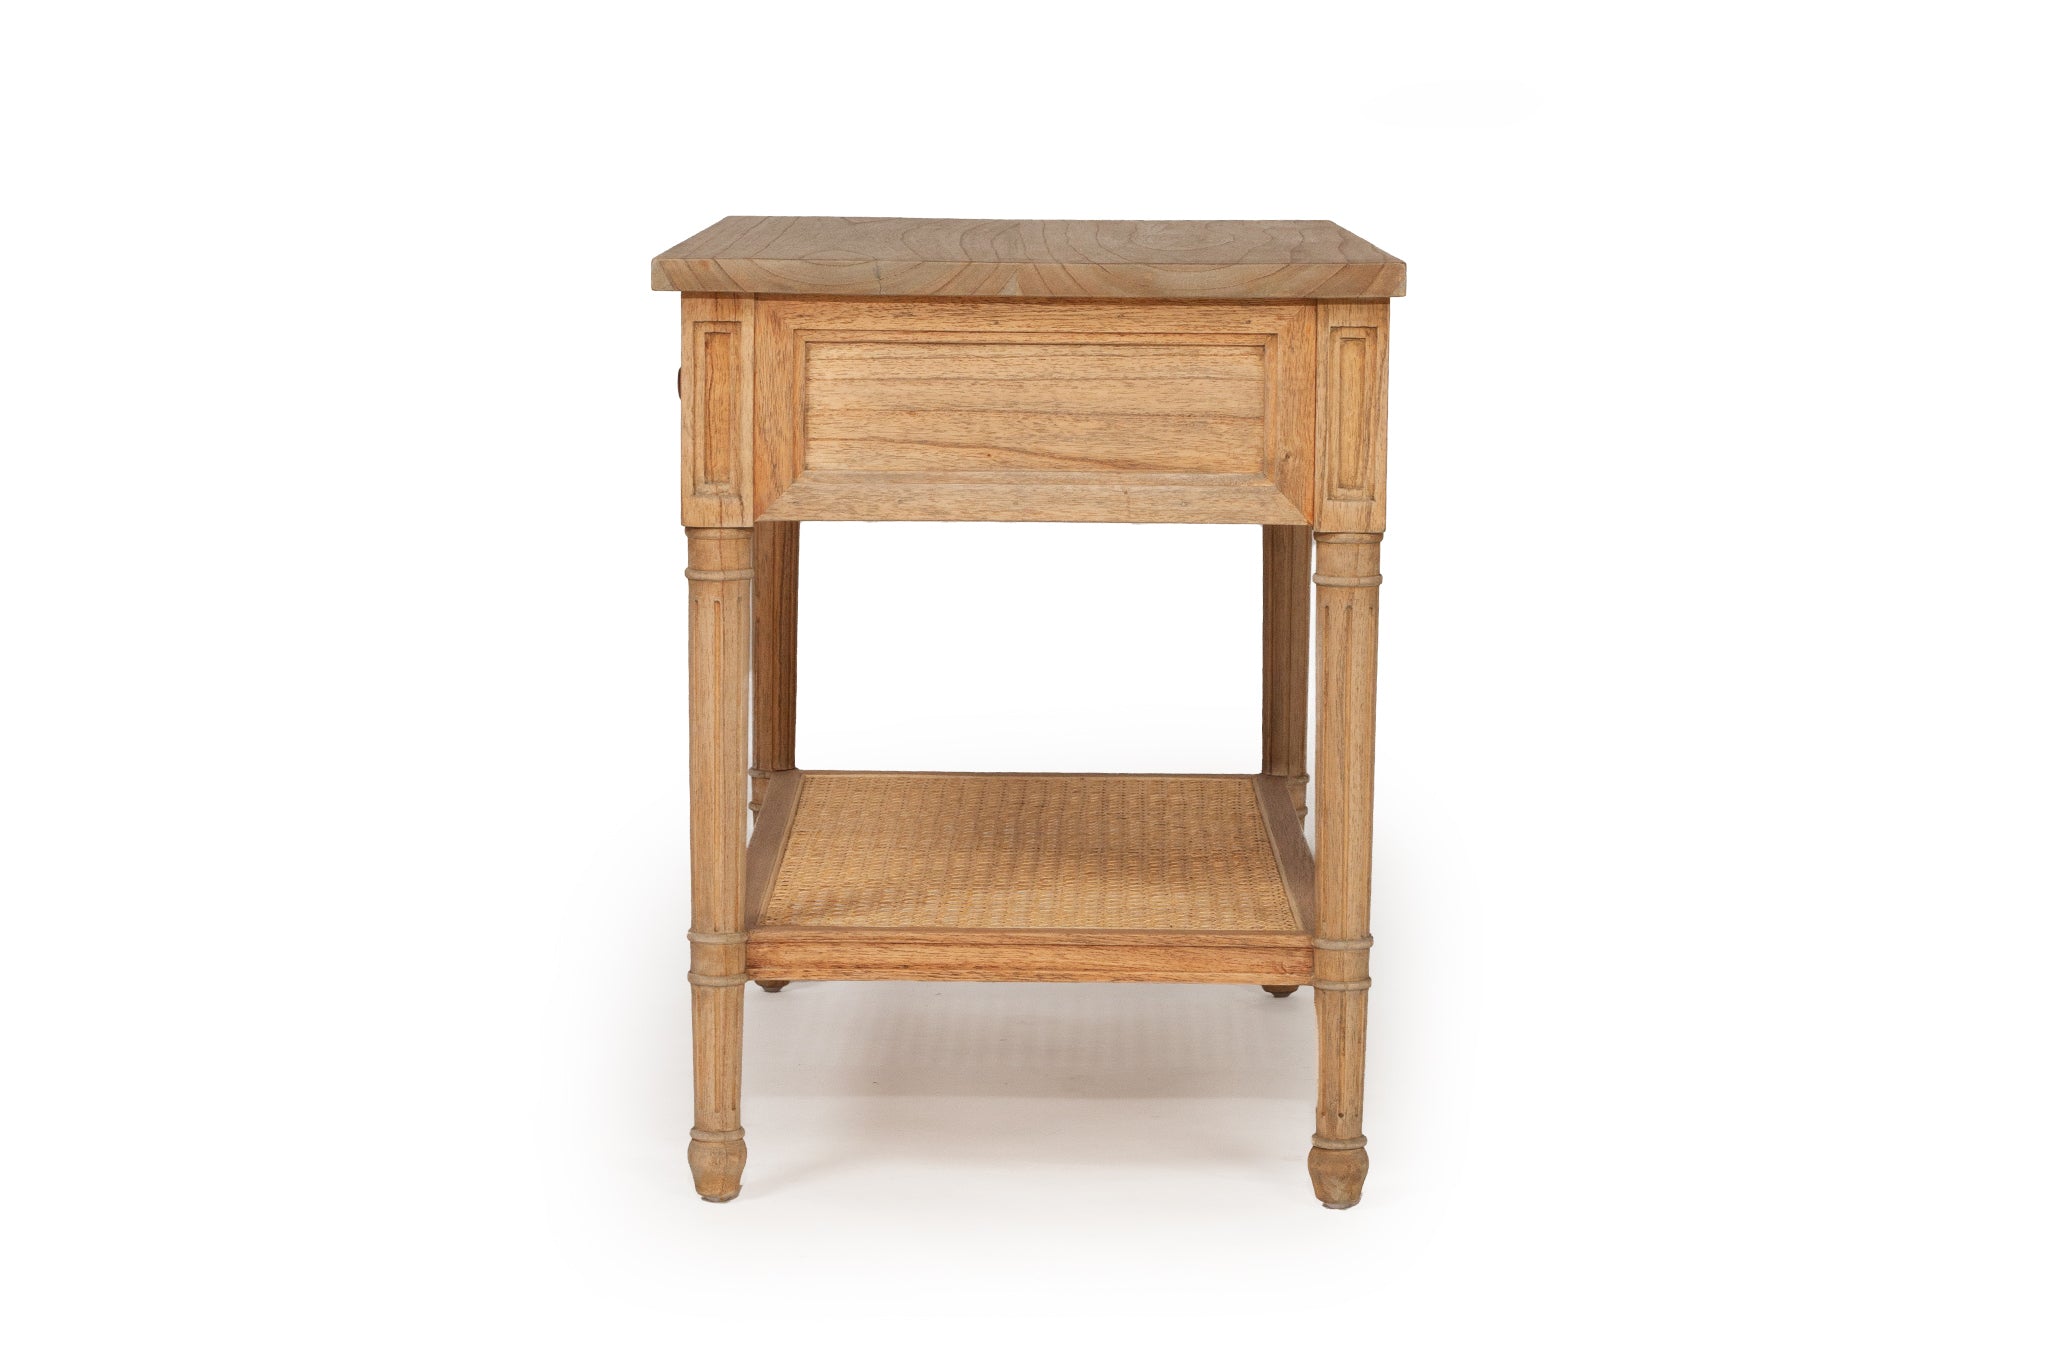 Vaucluse White Cedar & Cane Nightstand / Bedside Table 91cm – Weathered Oak